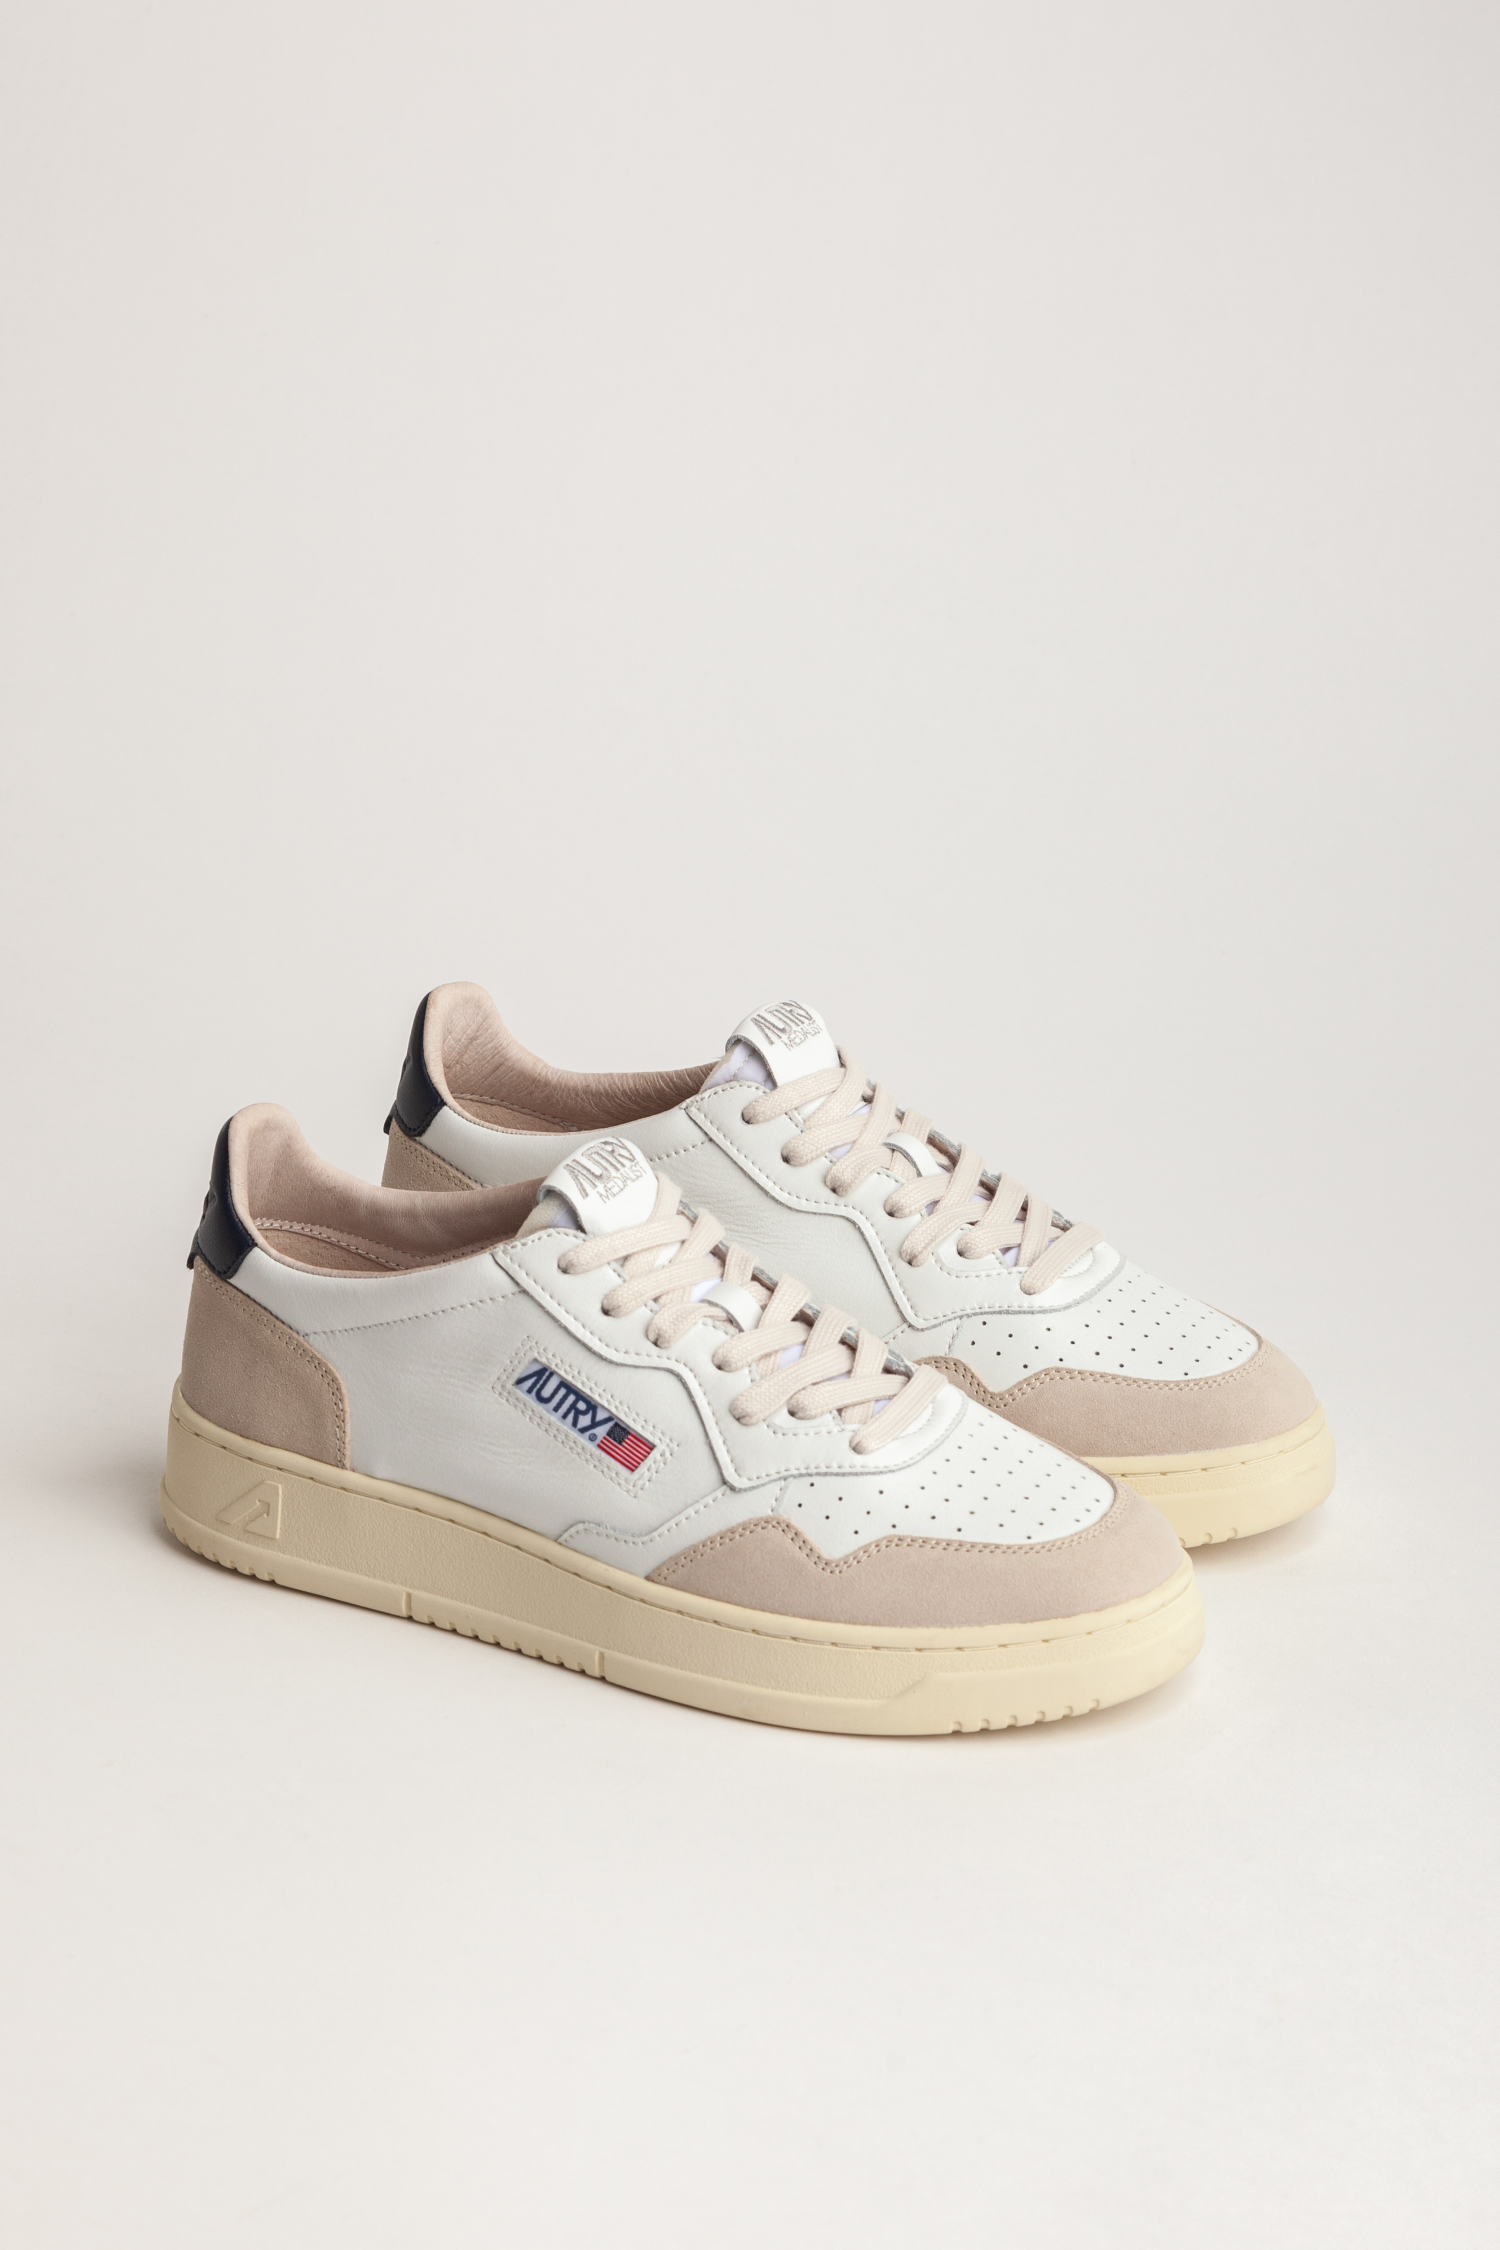 AULM-LS28 - MEDALIST LOW SNEAKERS IN SUEDE AND LEATHER WHITE AND BLUE